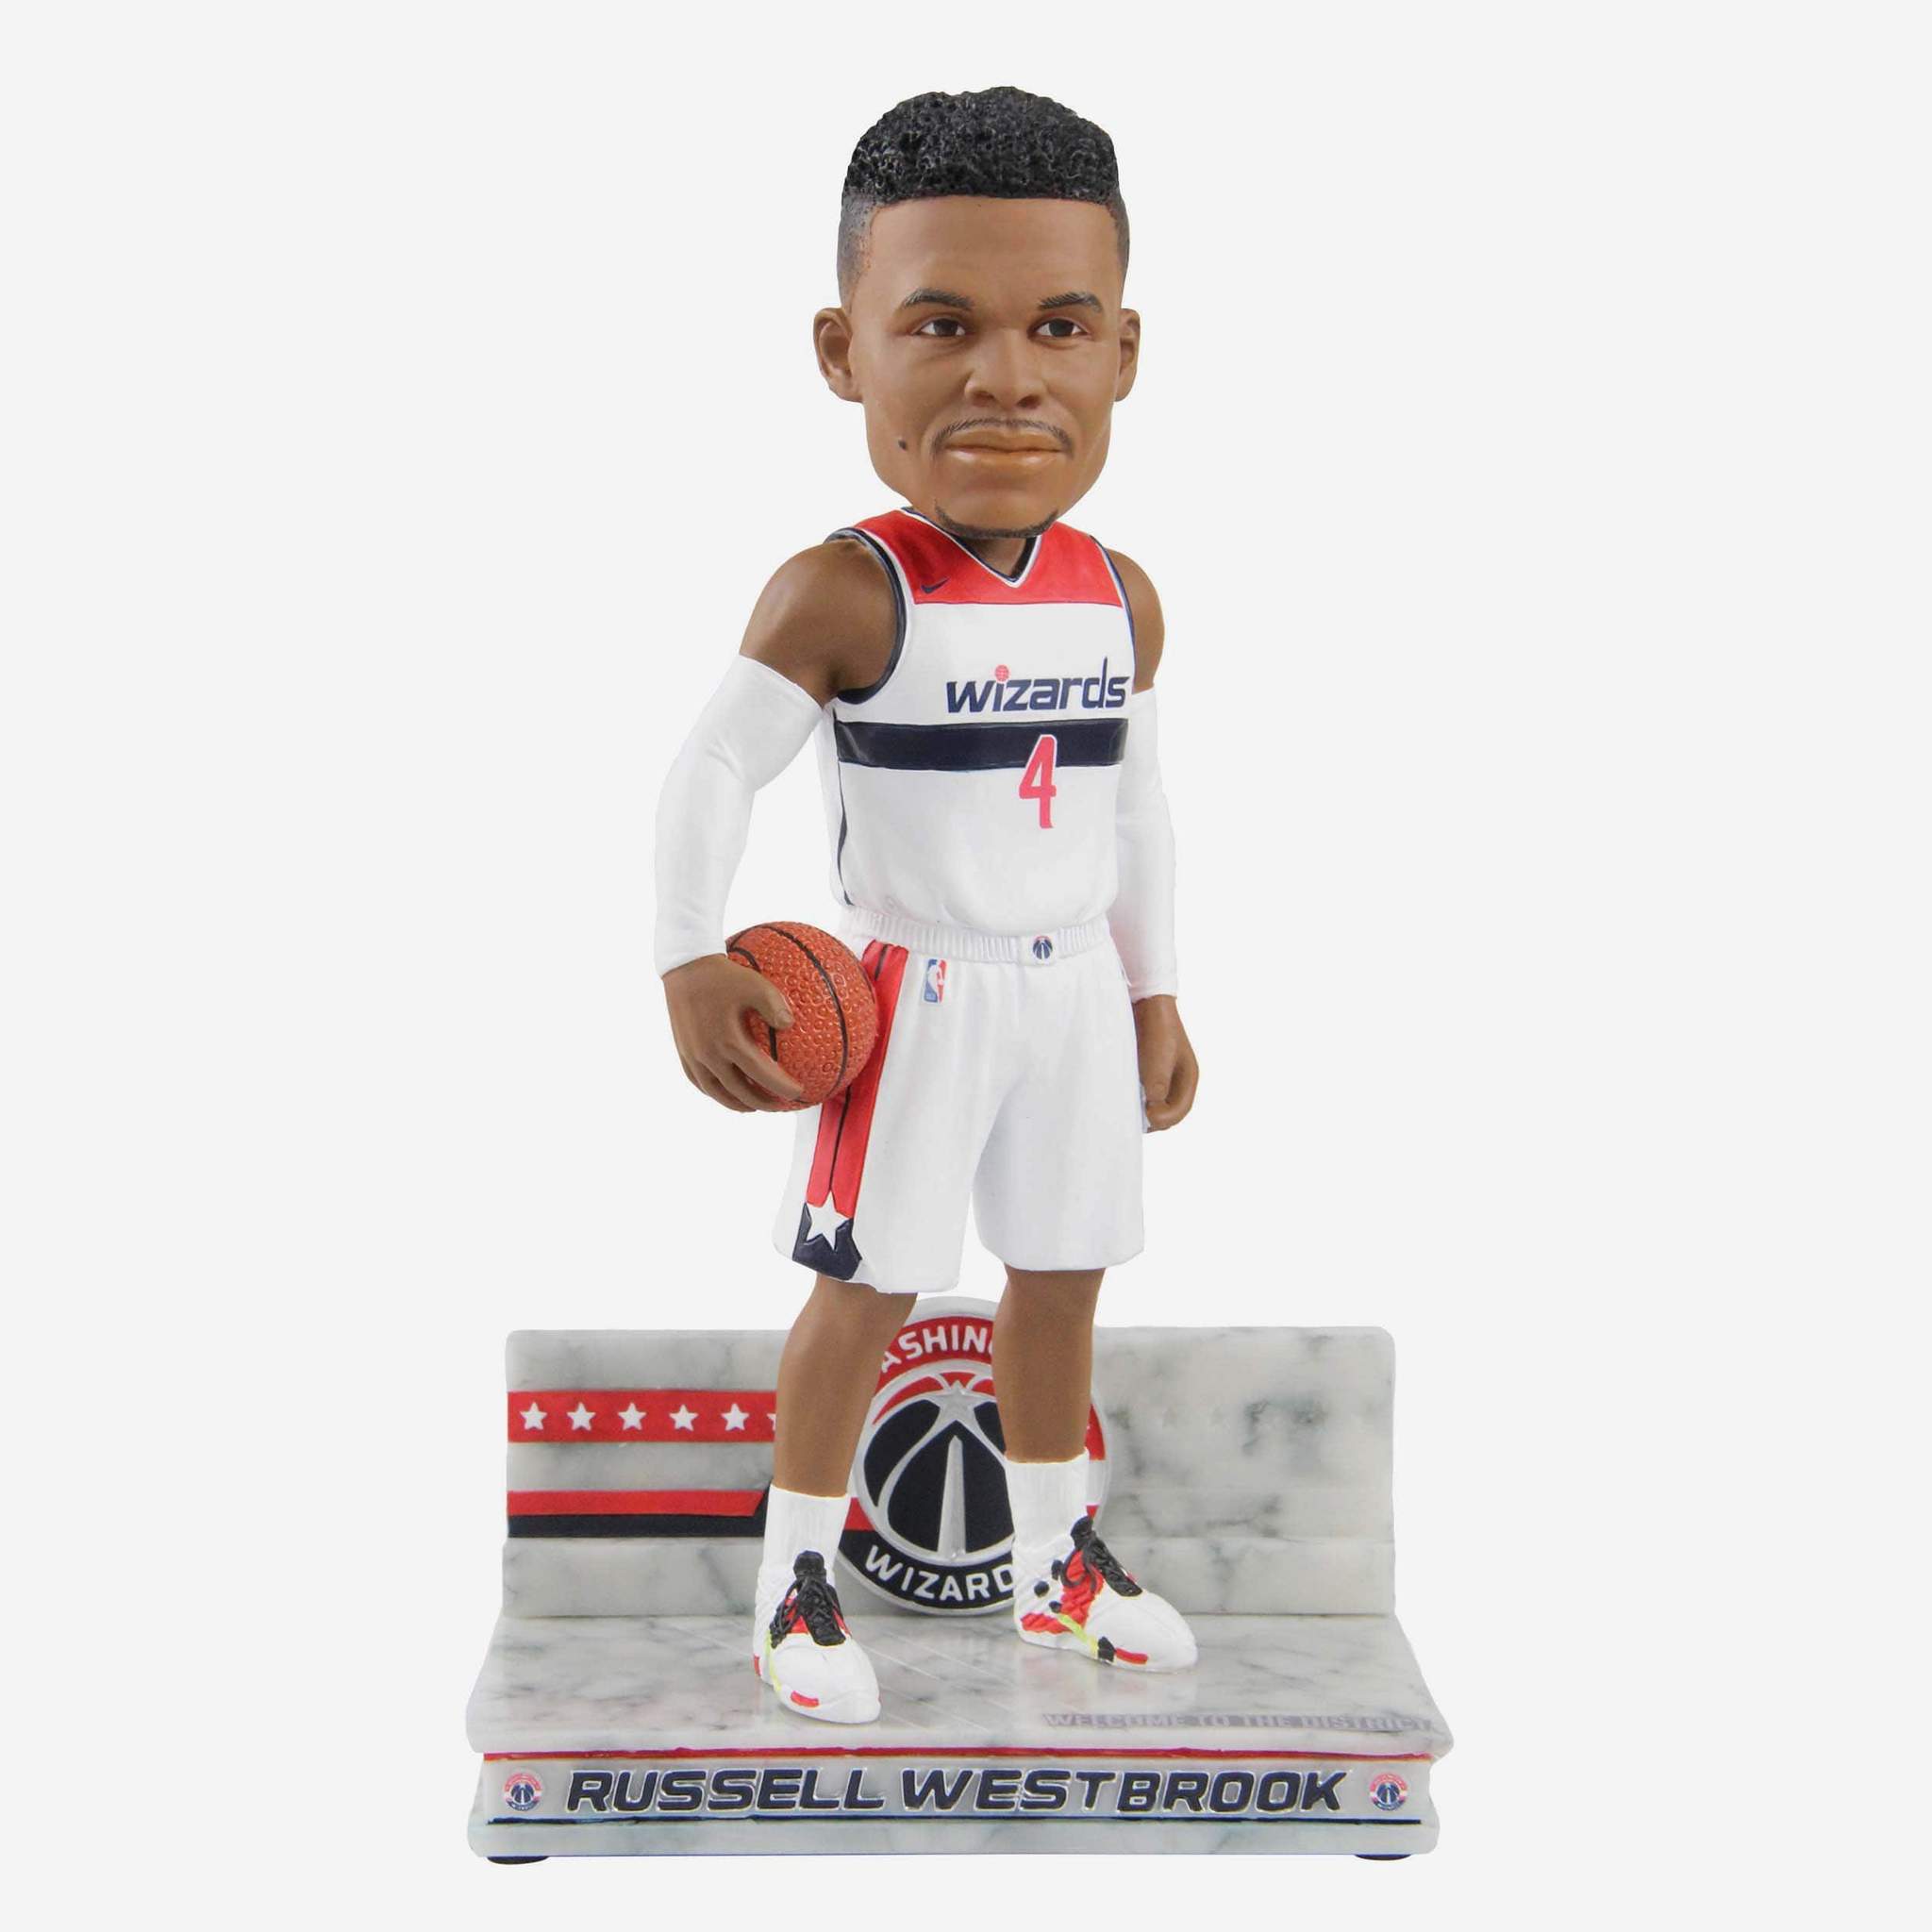 Washington Wizards fans need this Russell Westbrook City Edition bobble